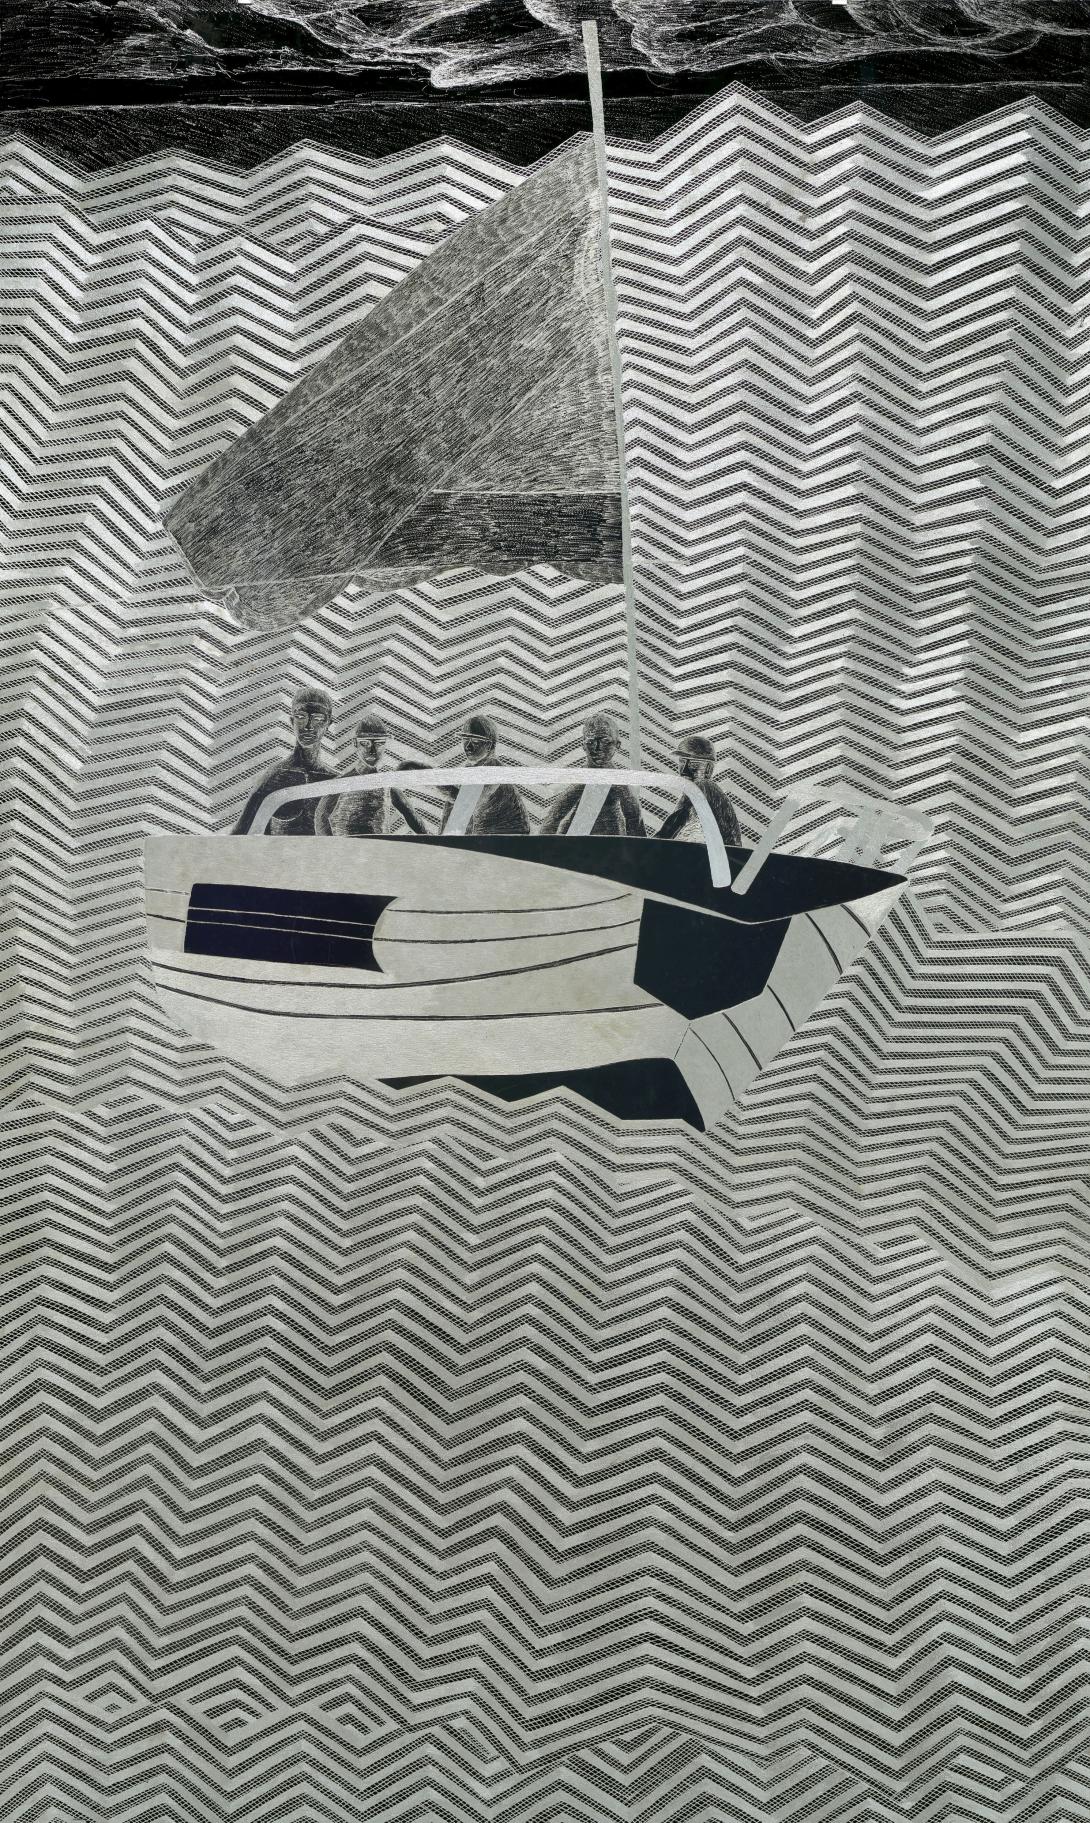 An etching of a Djirrit (boat) on the ocean into a shiny metal surface.